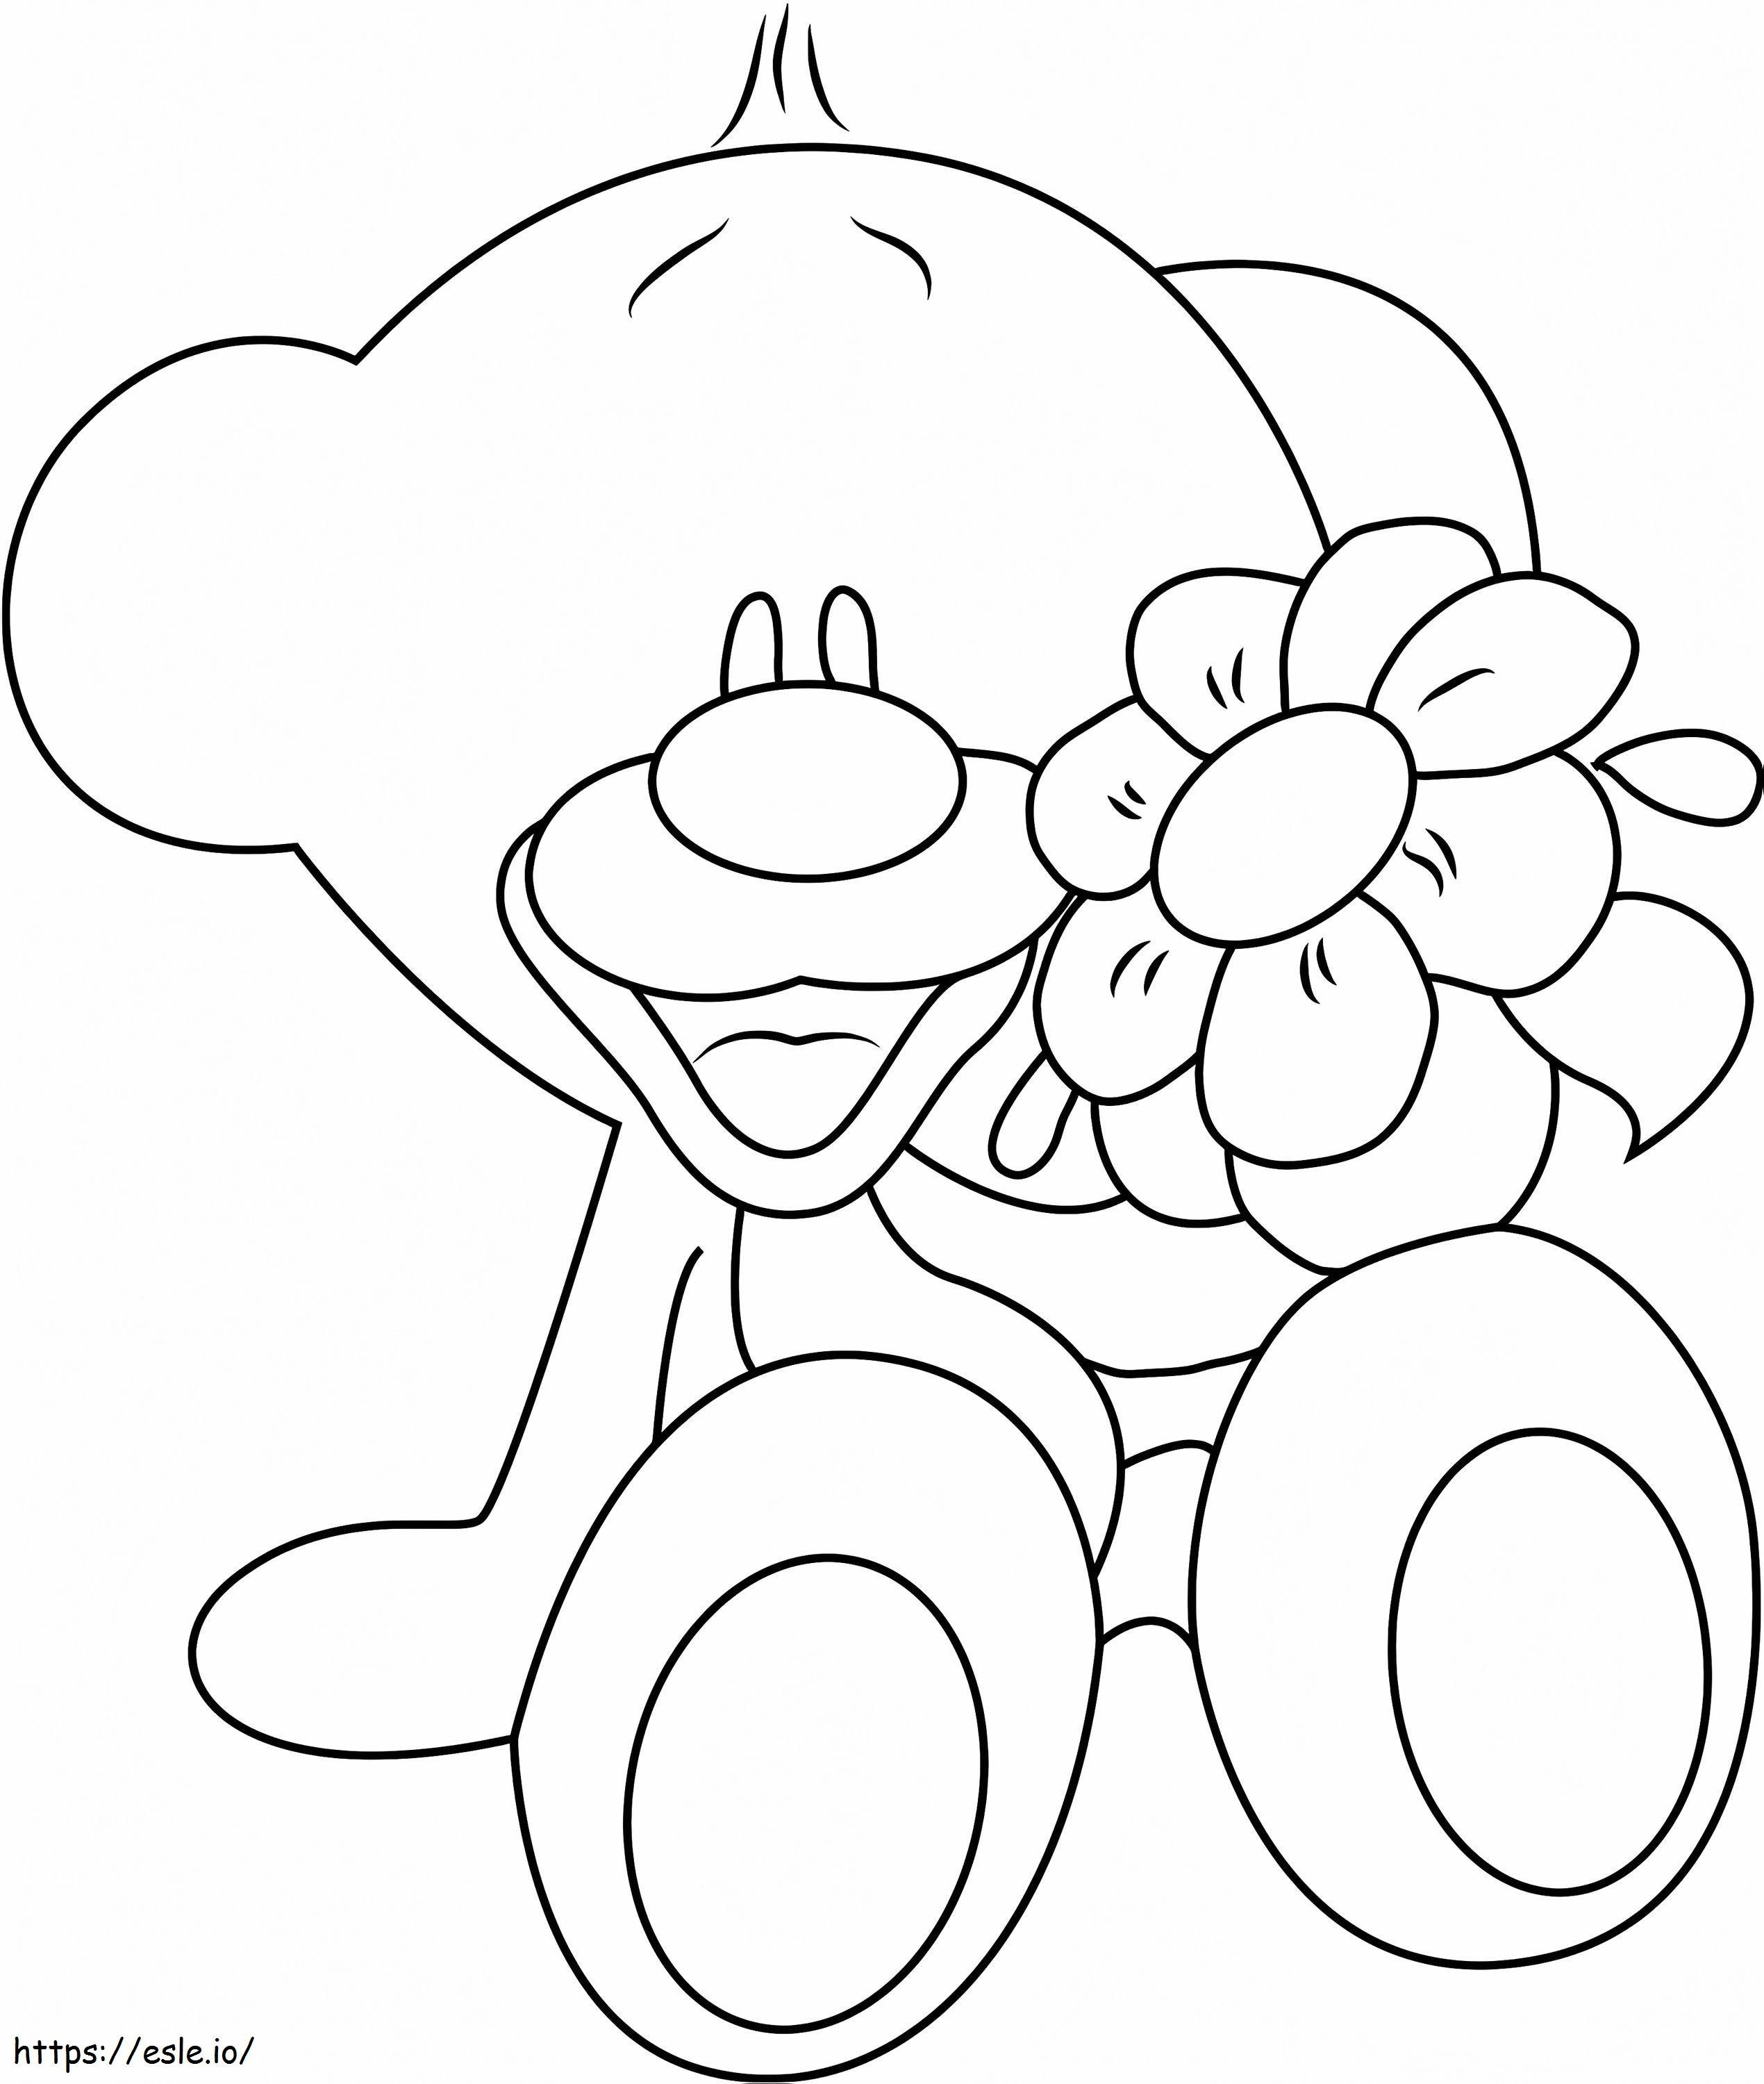 1531883112 Pimboli With Flower A4 coloring page